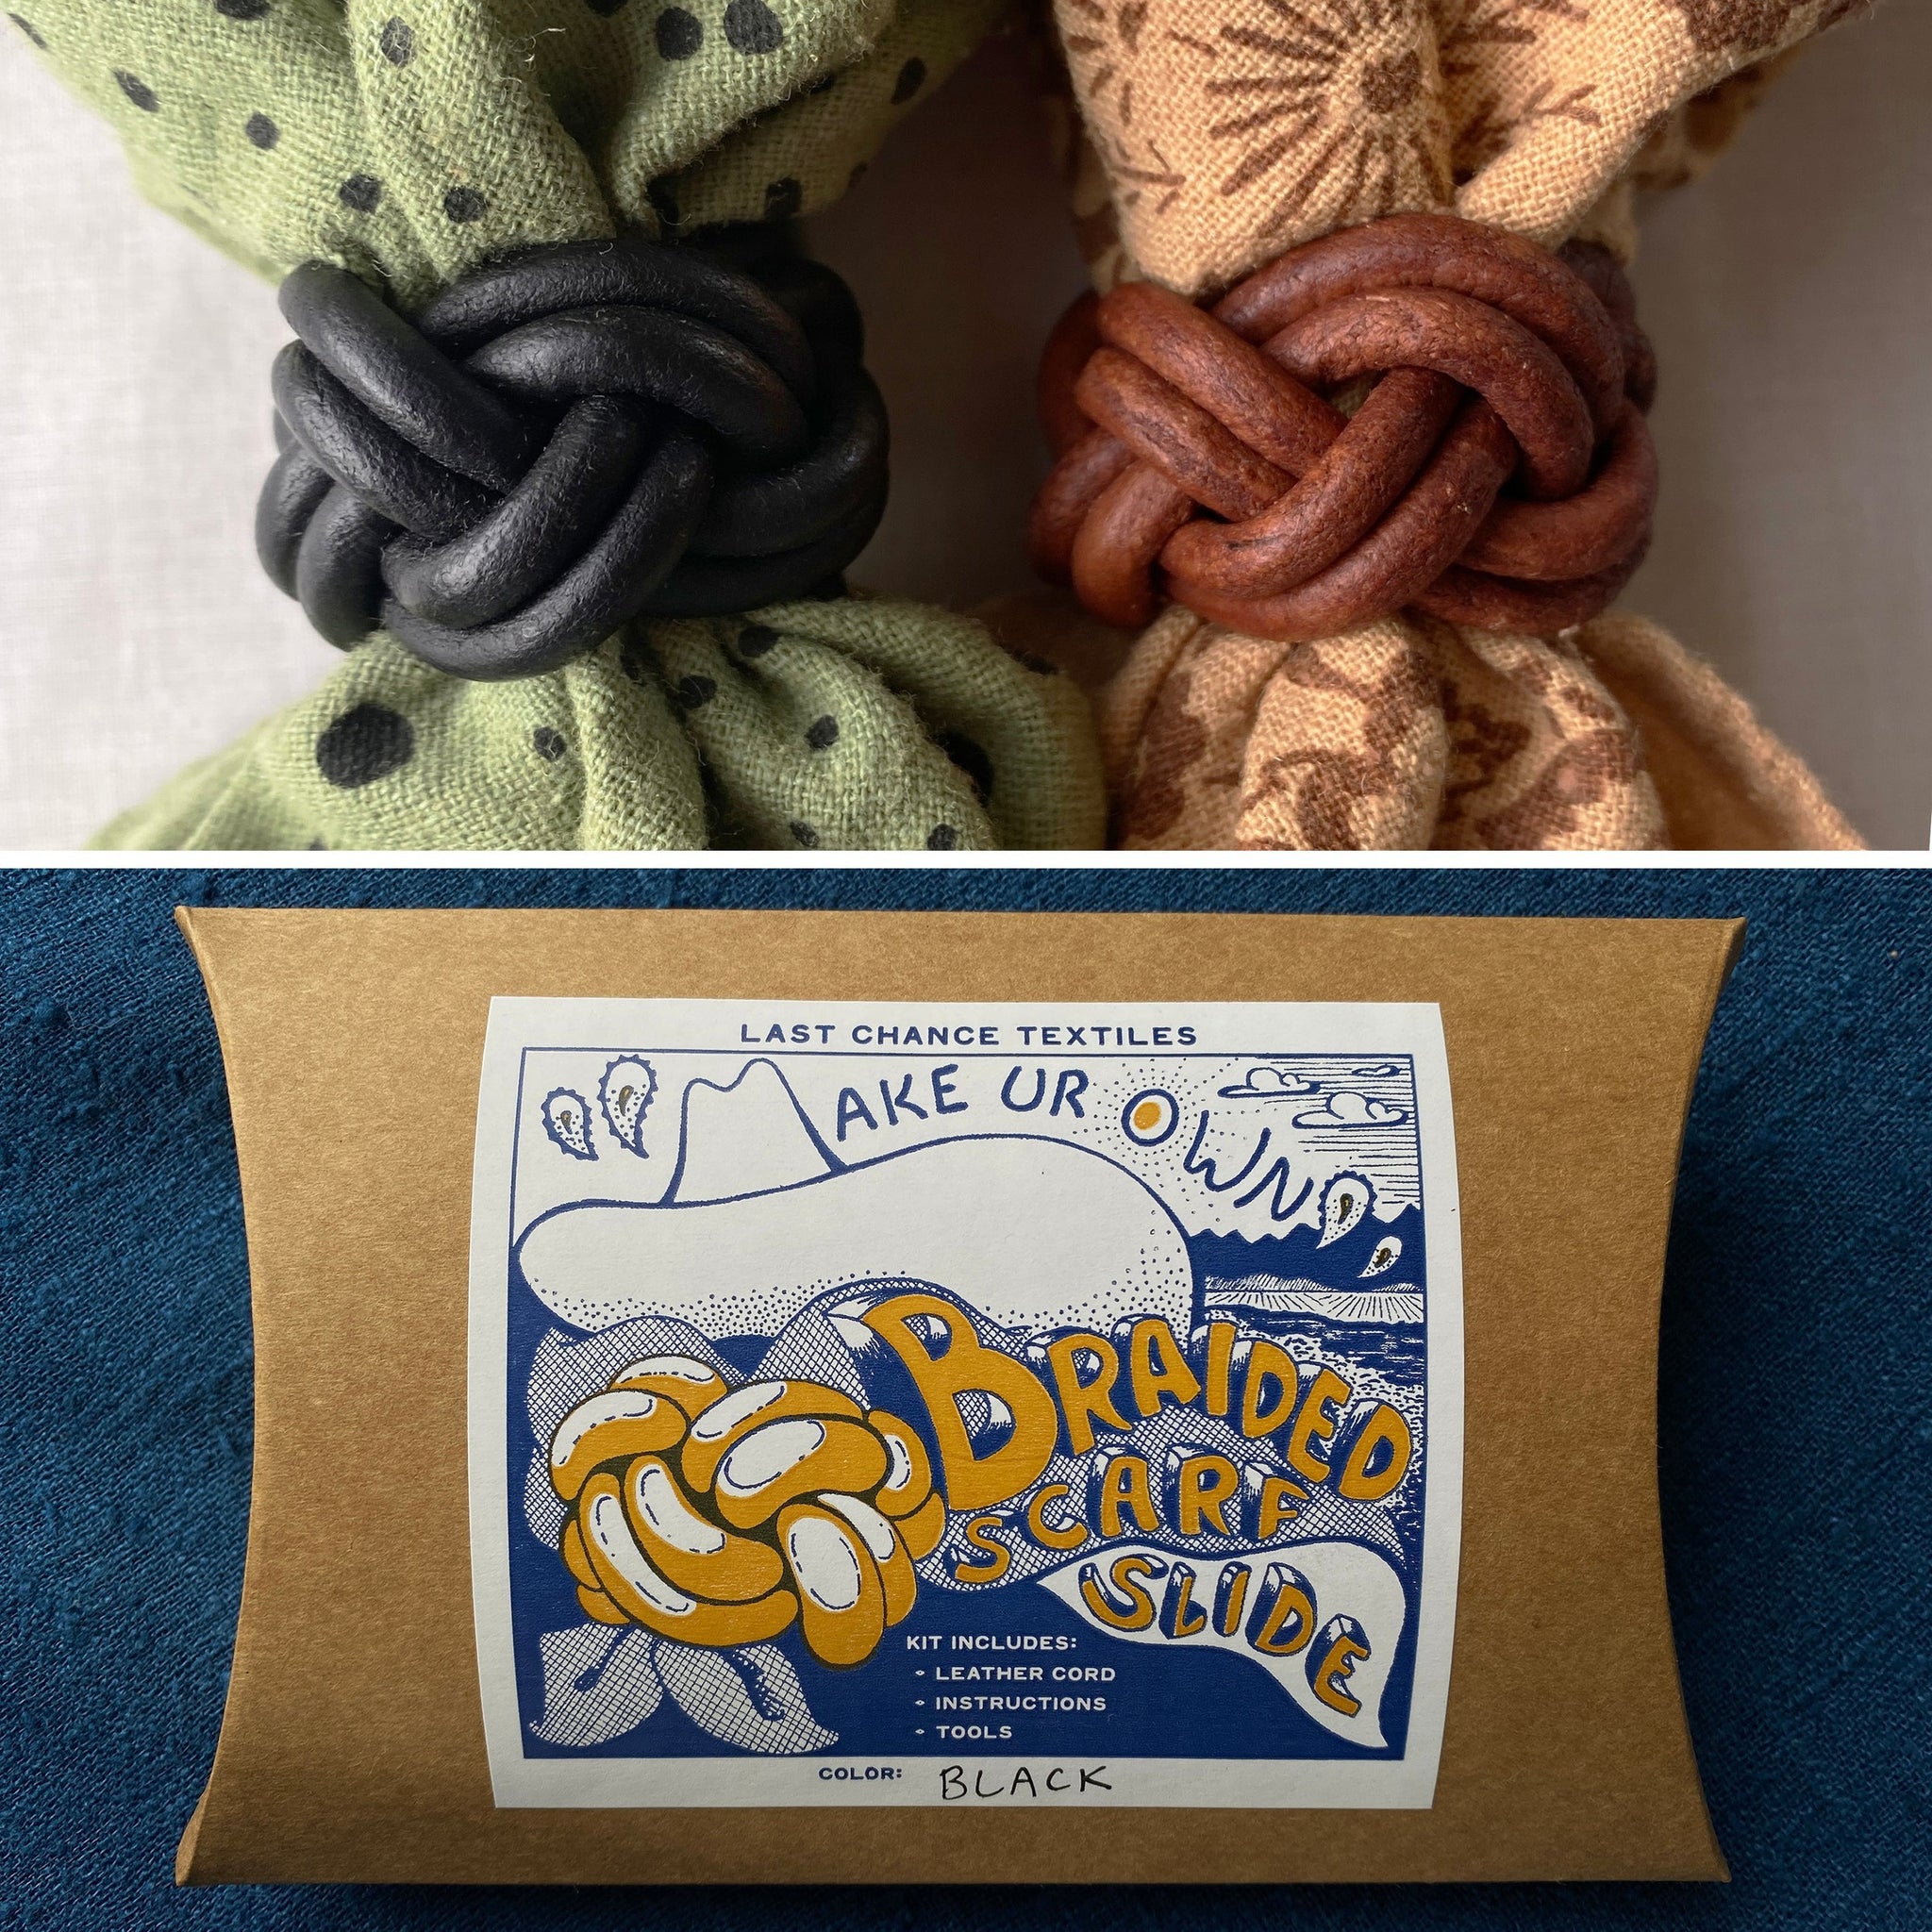 Braided Leather Scarf Slide Kit – gather here online